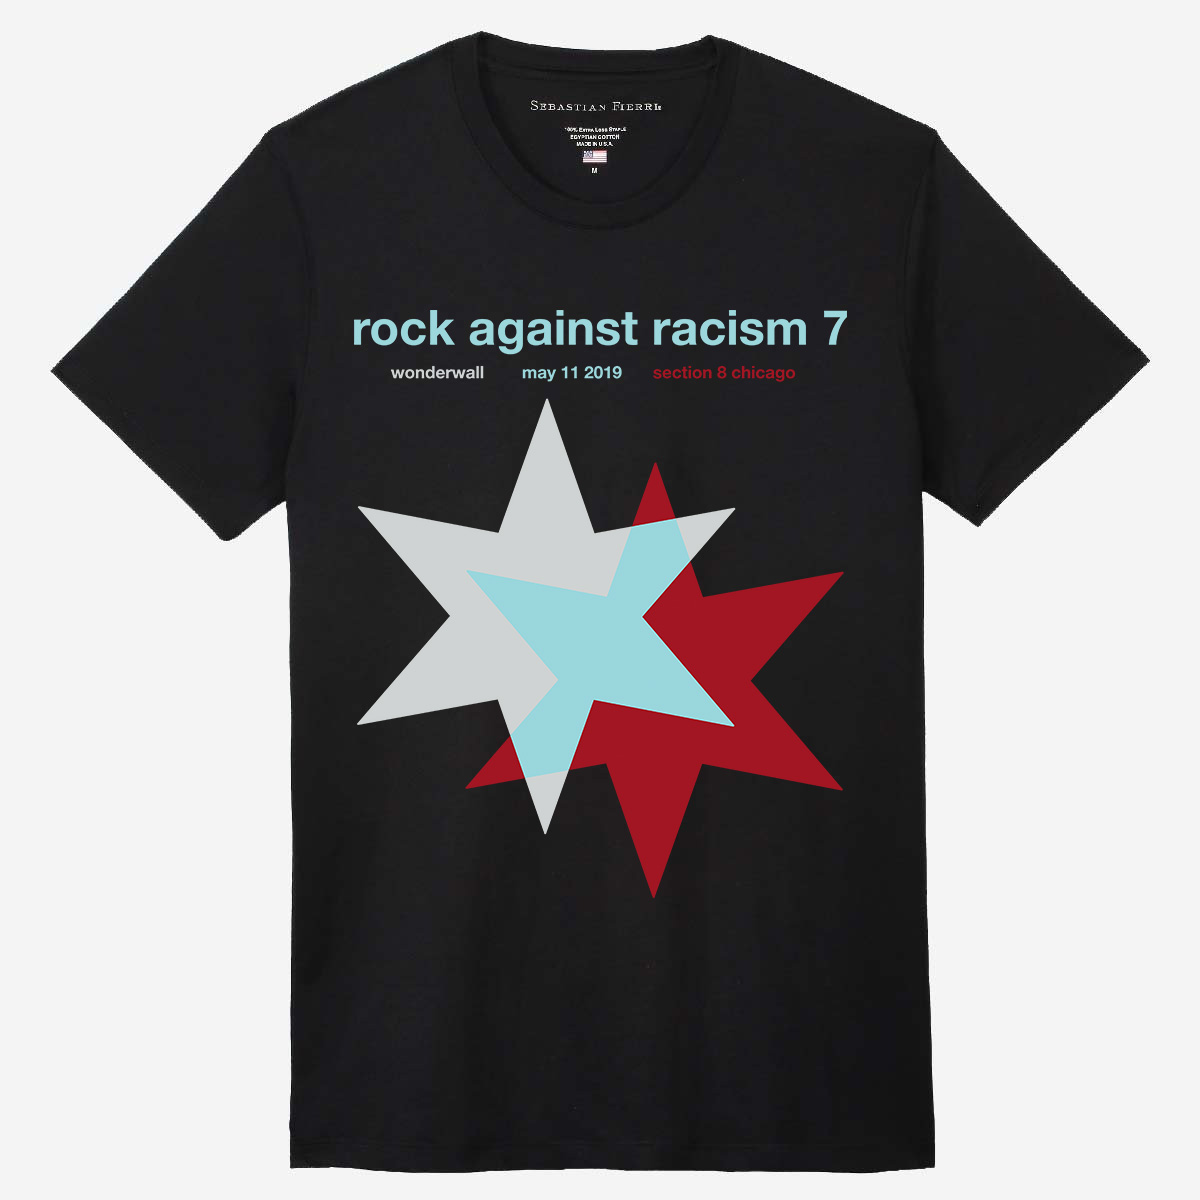 mockup of Rock Against Racism t-shirt, black shirt with red, blue, and grey text and stars